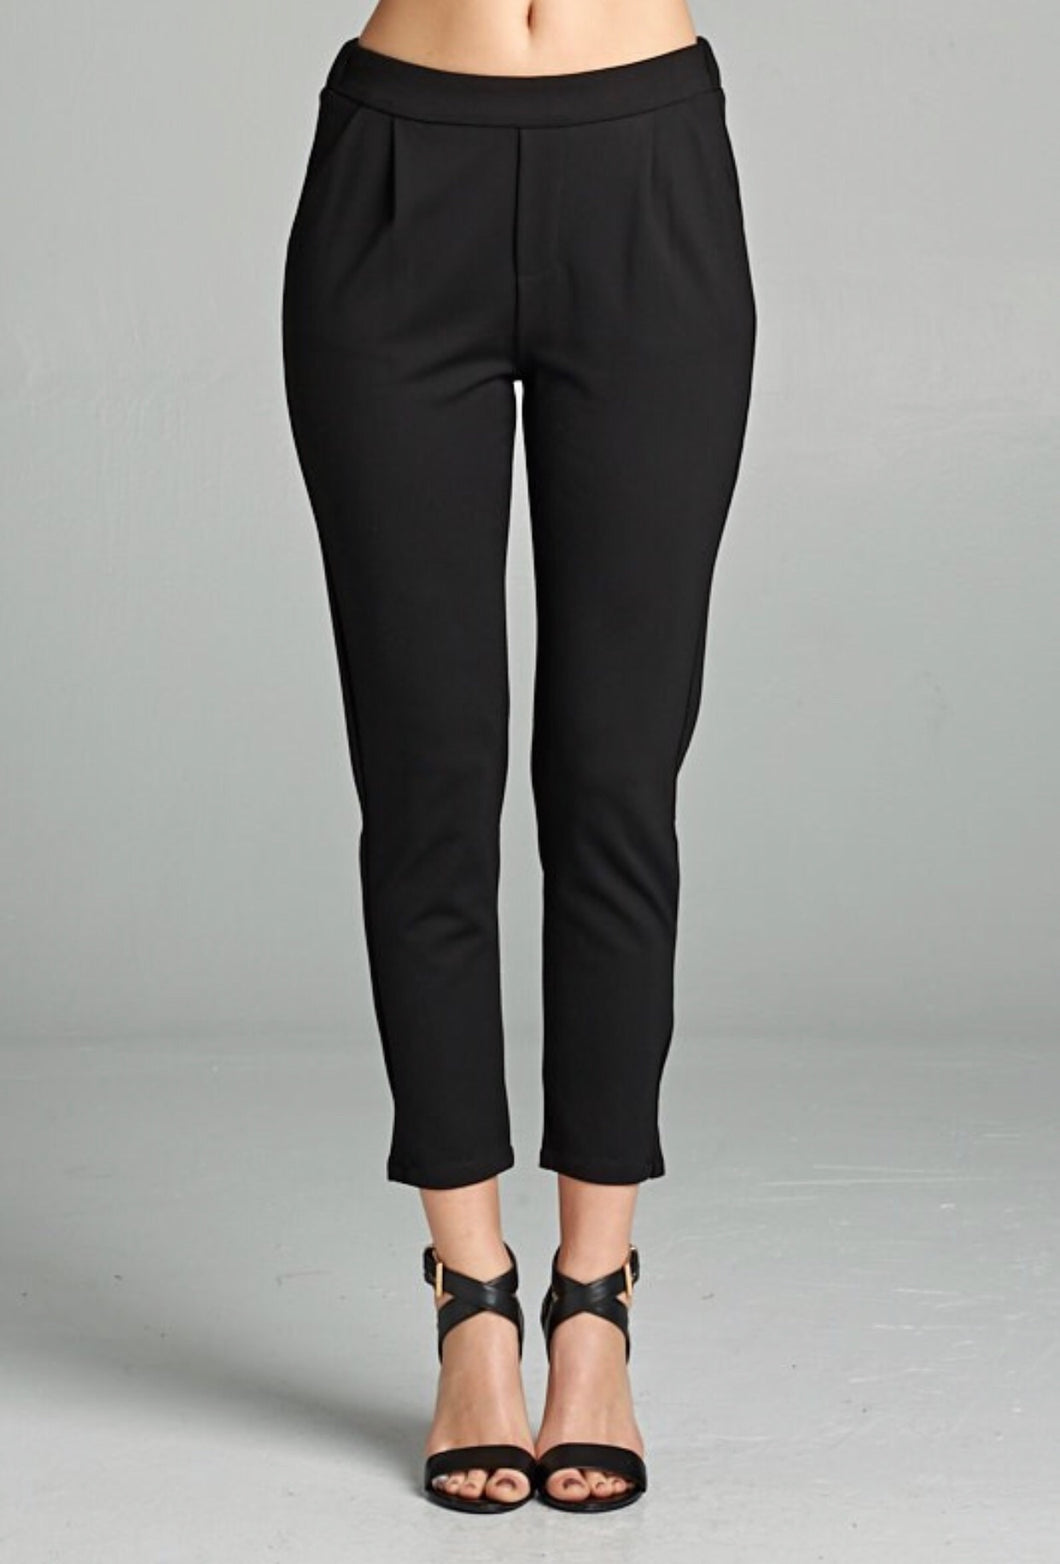 Ellison Cropped Pants in Black and Cream